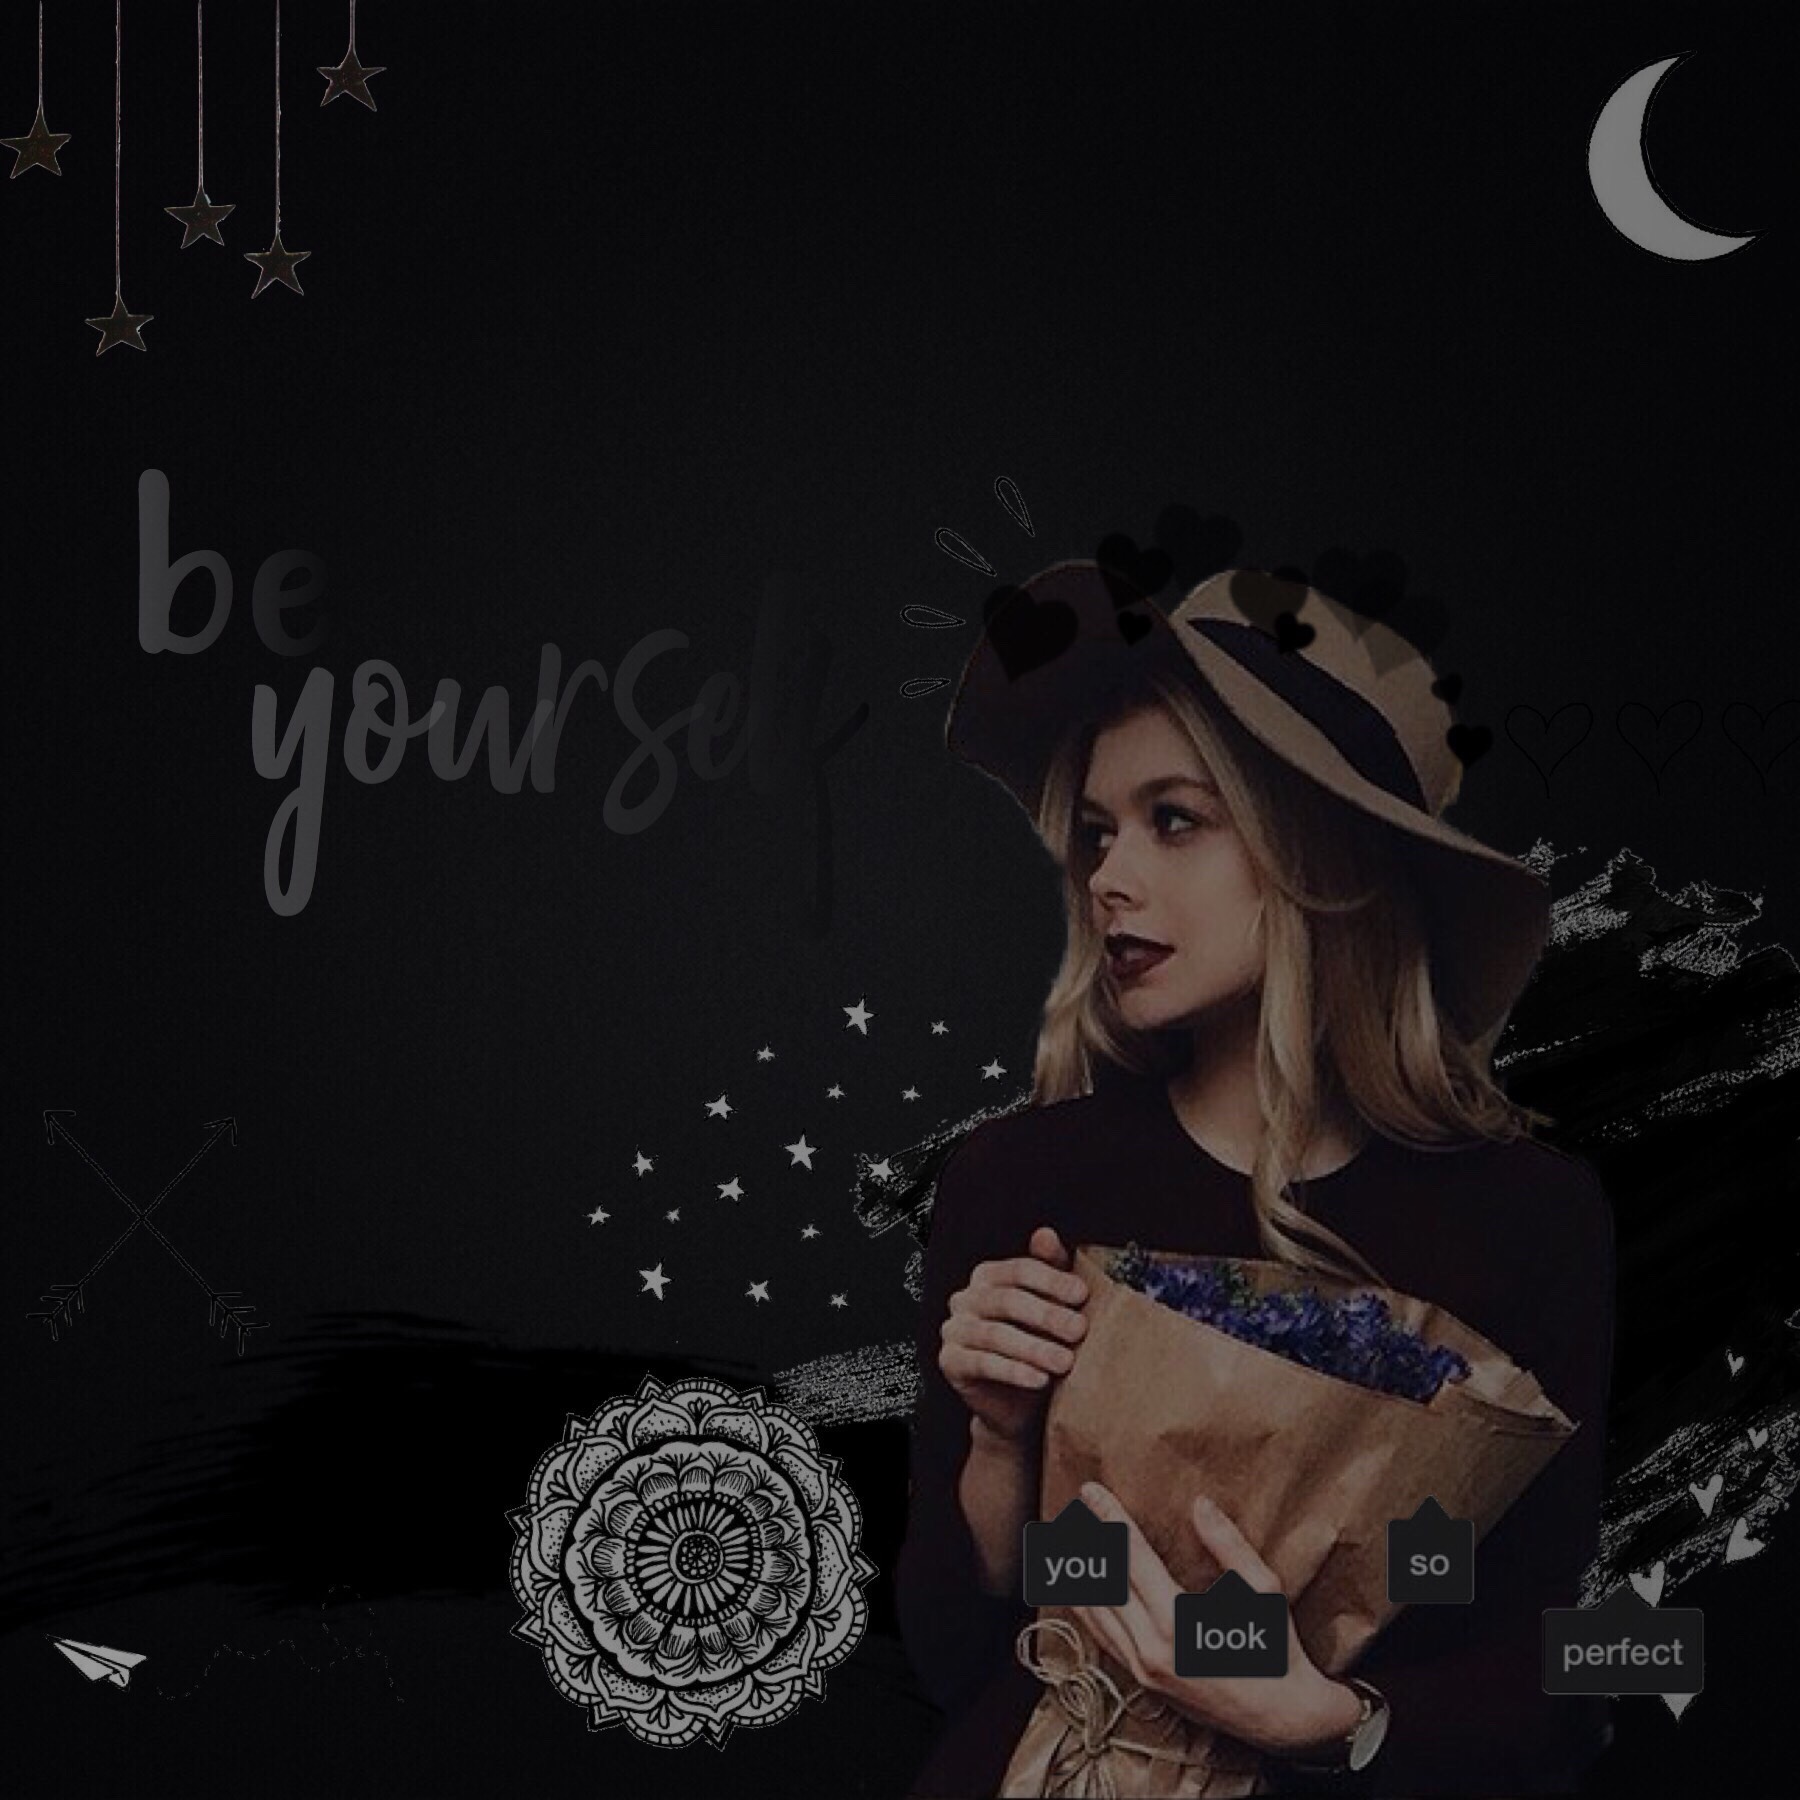 🖤tap🖤

heyyy first official collage of the new theme and i love it <3 i wanna space it out but i have 6 finished other than this one that i want to post not but i’ll wait!